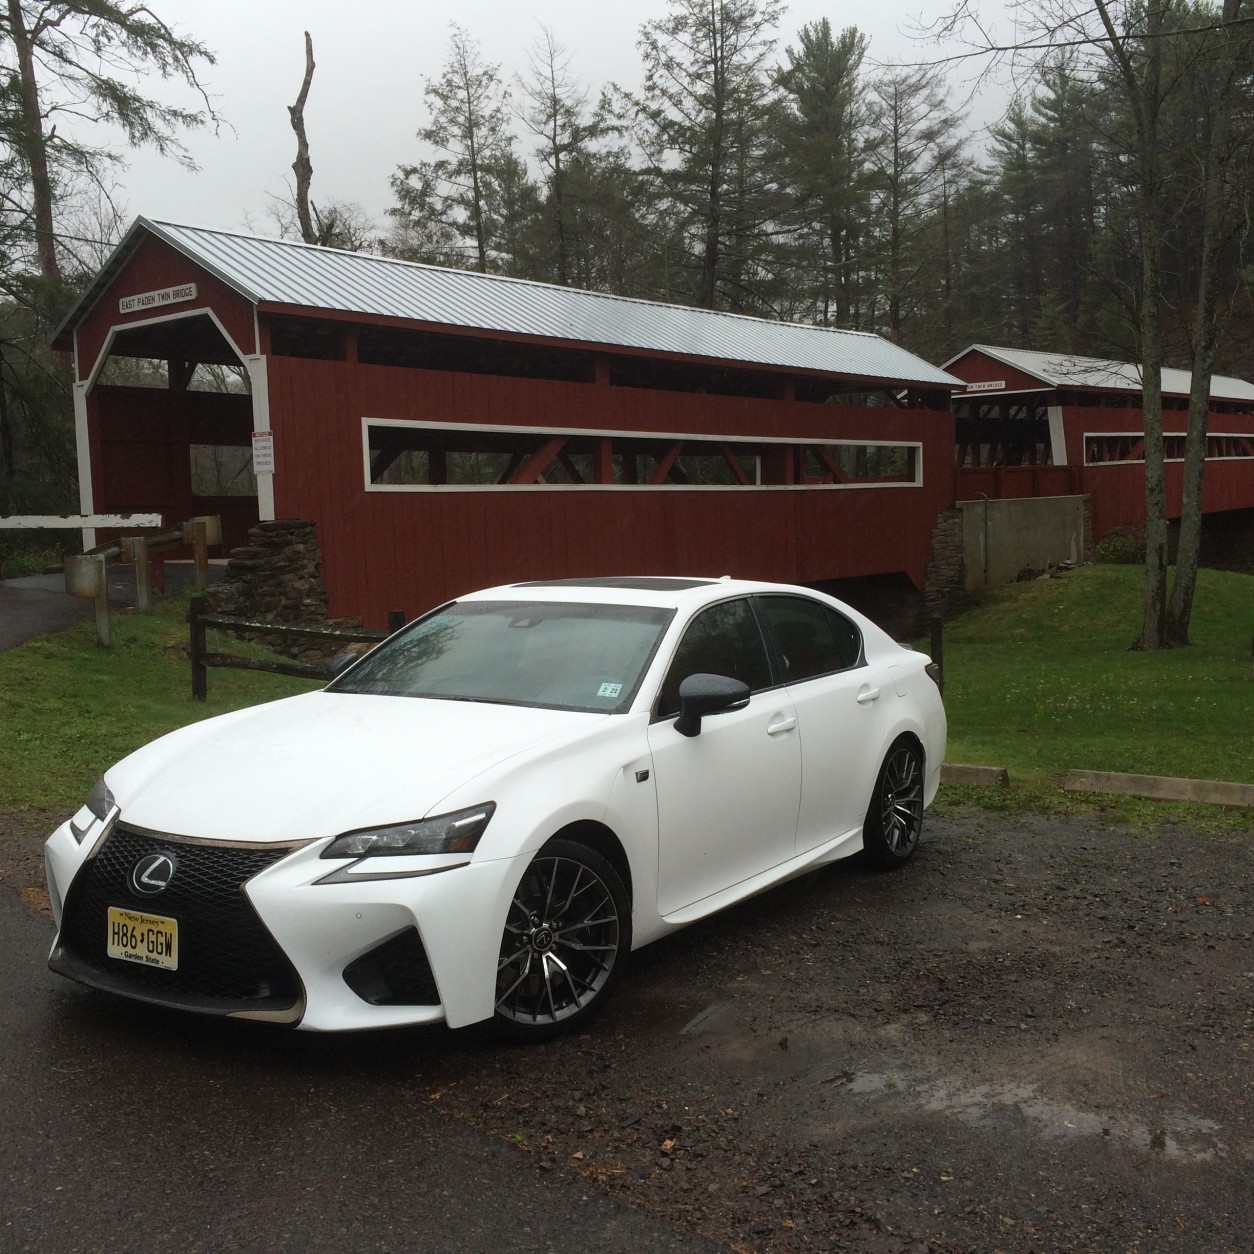 The new Lexus GS-F loses the usual V6 of a regular GS and adds a 5.0L V8 that’s good for 467hp. (WTOP/Mike Parris)